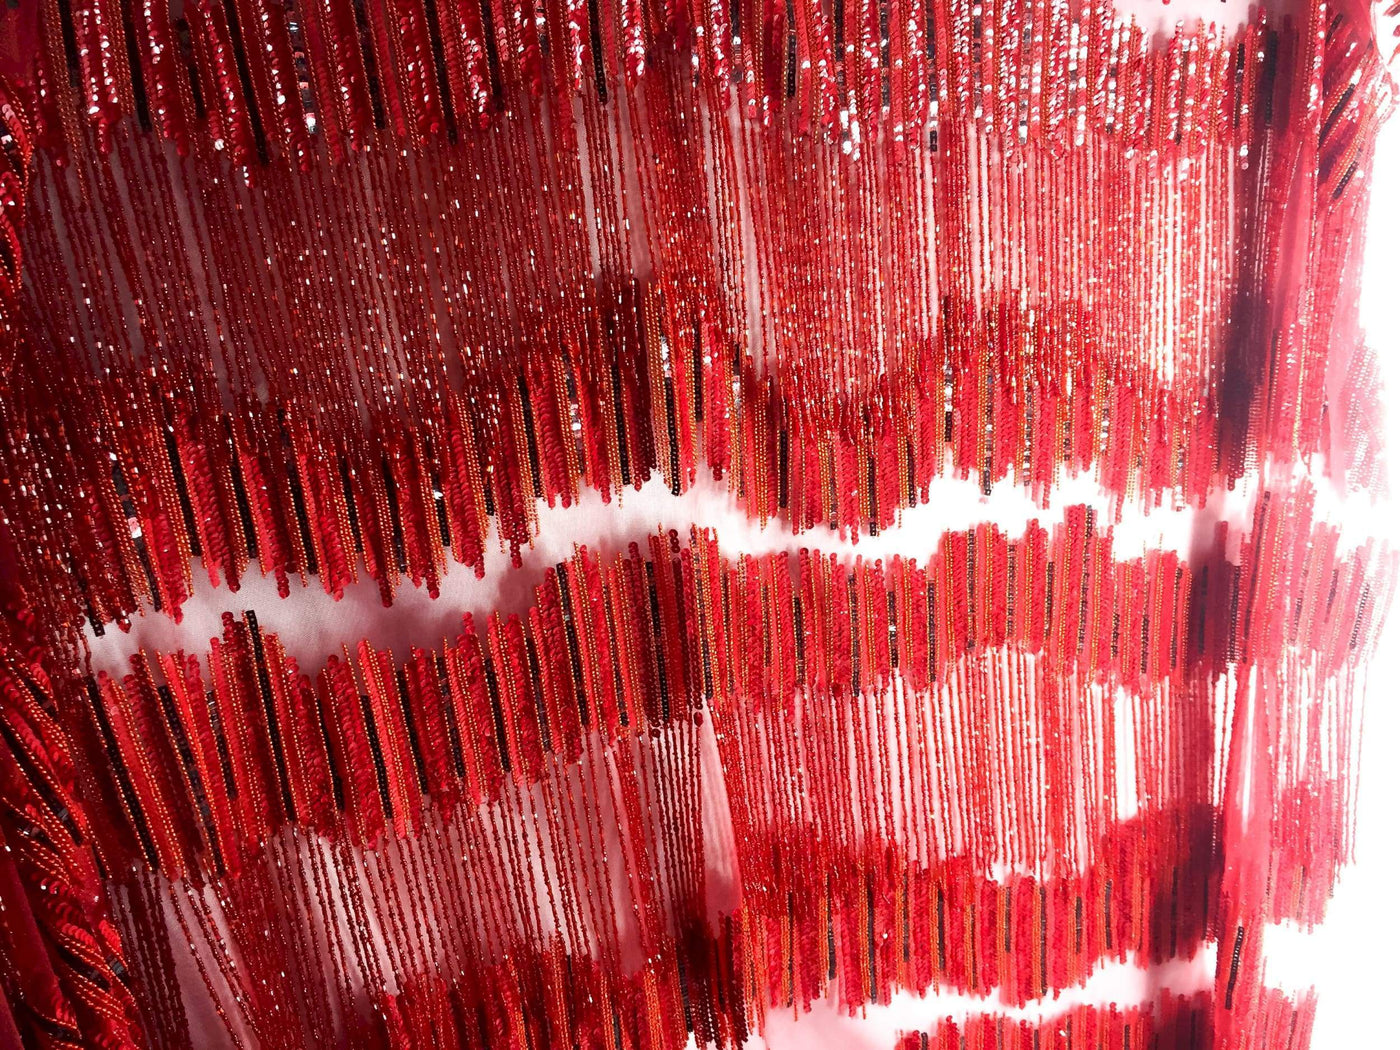 Handmade Fringes&sequines red lace -SAMPLE